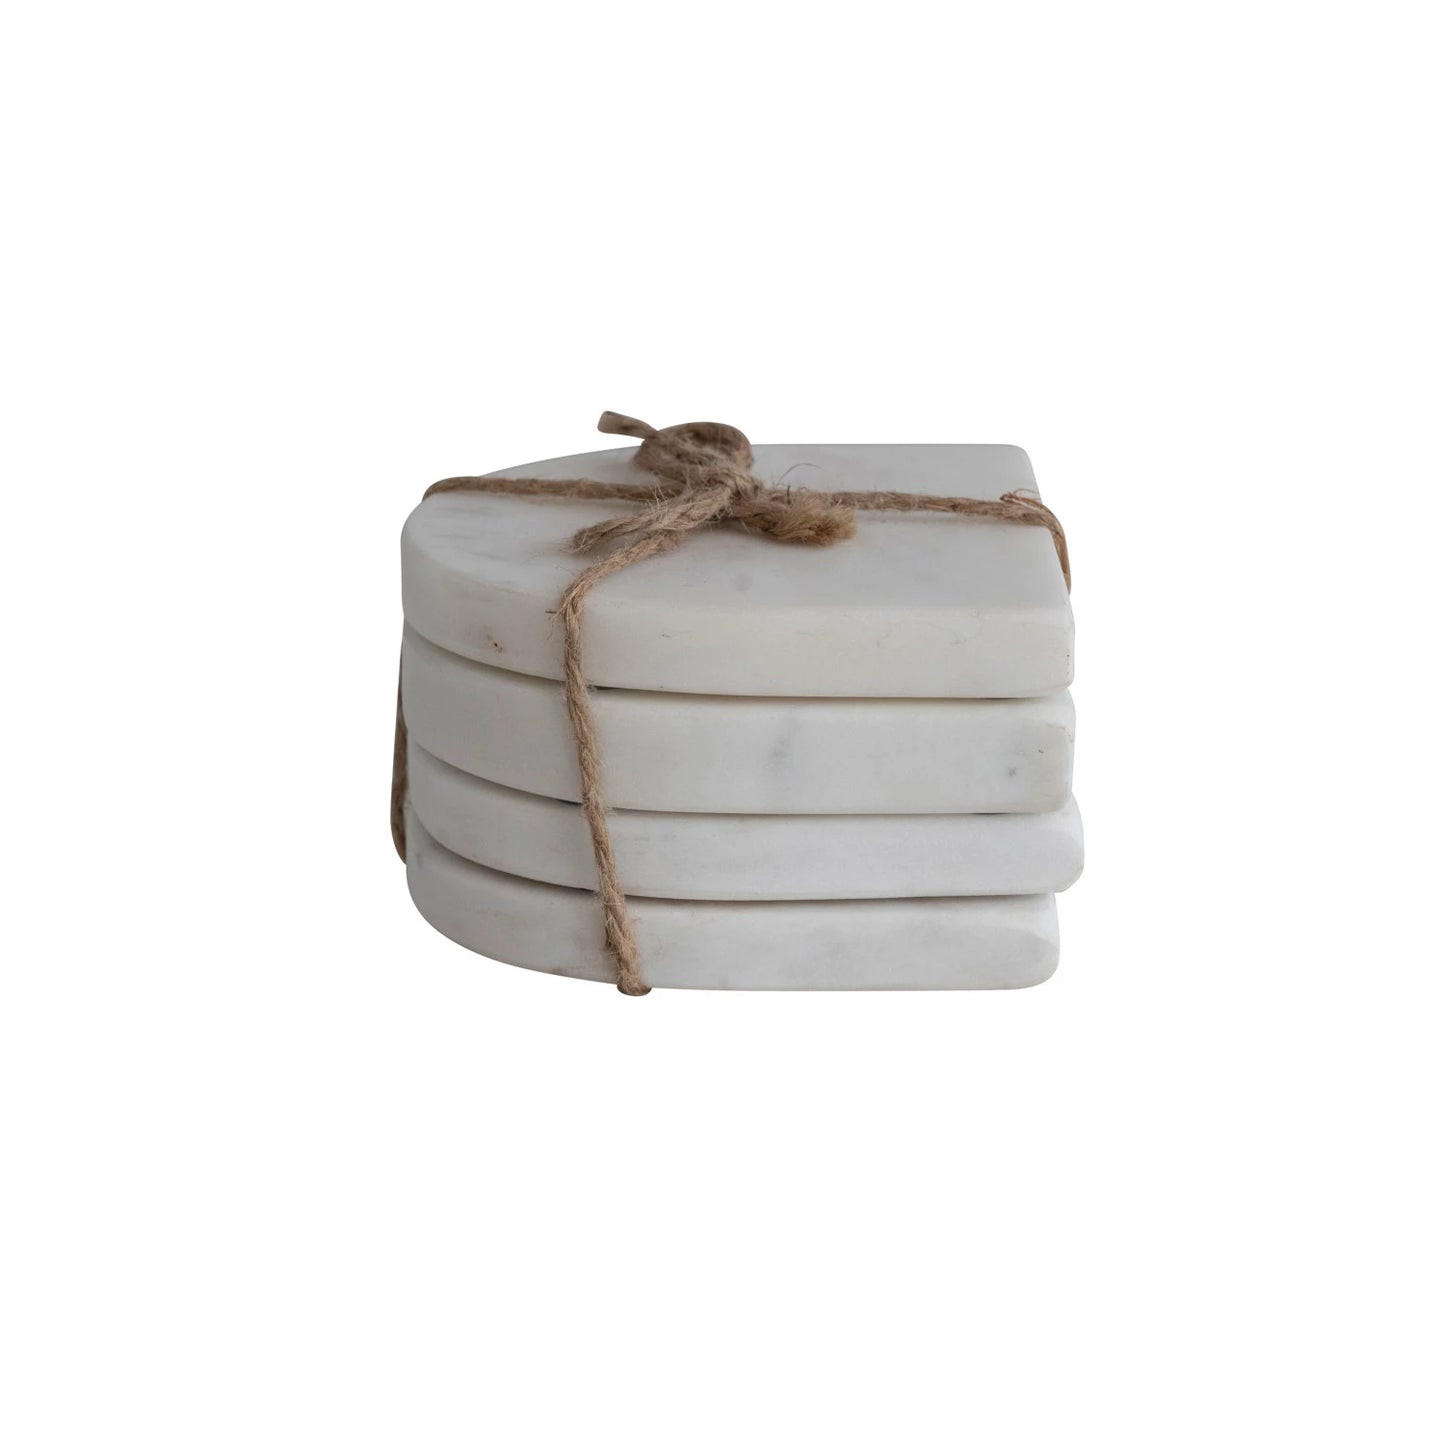 Arched Marble Coasters